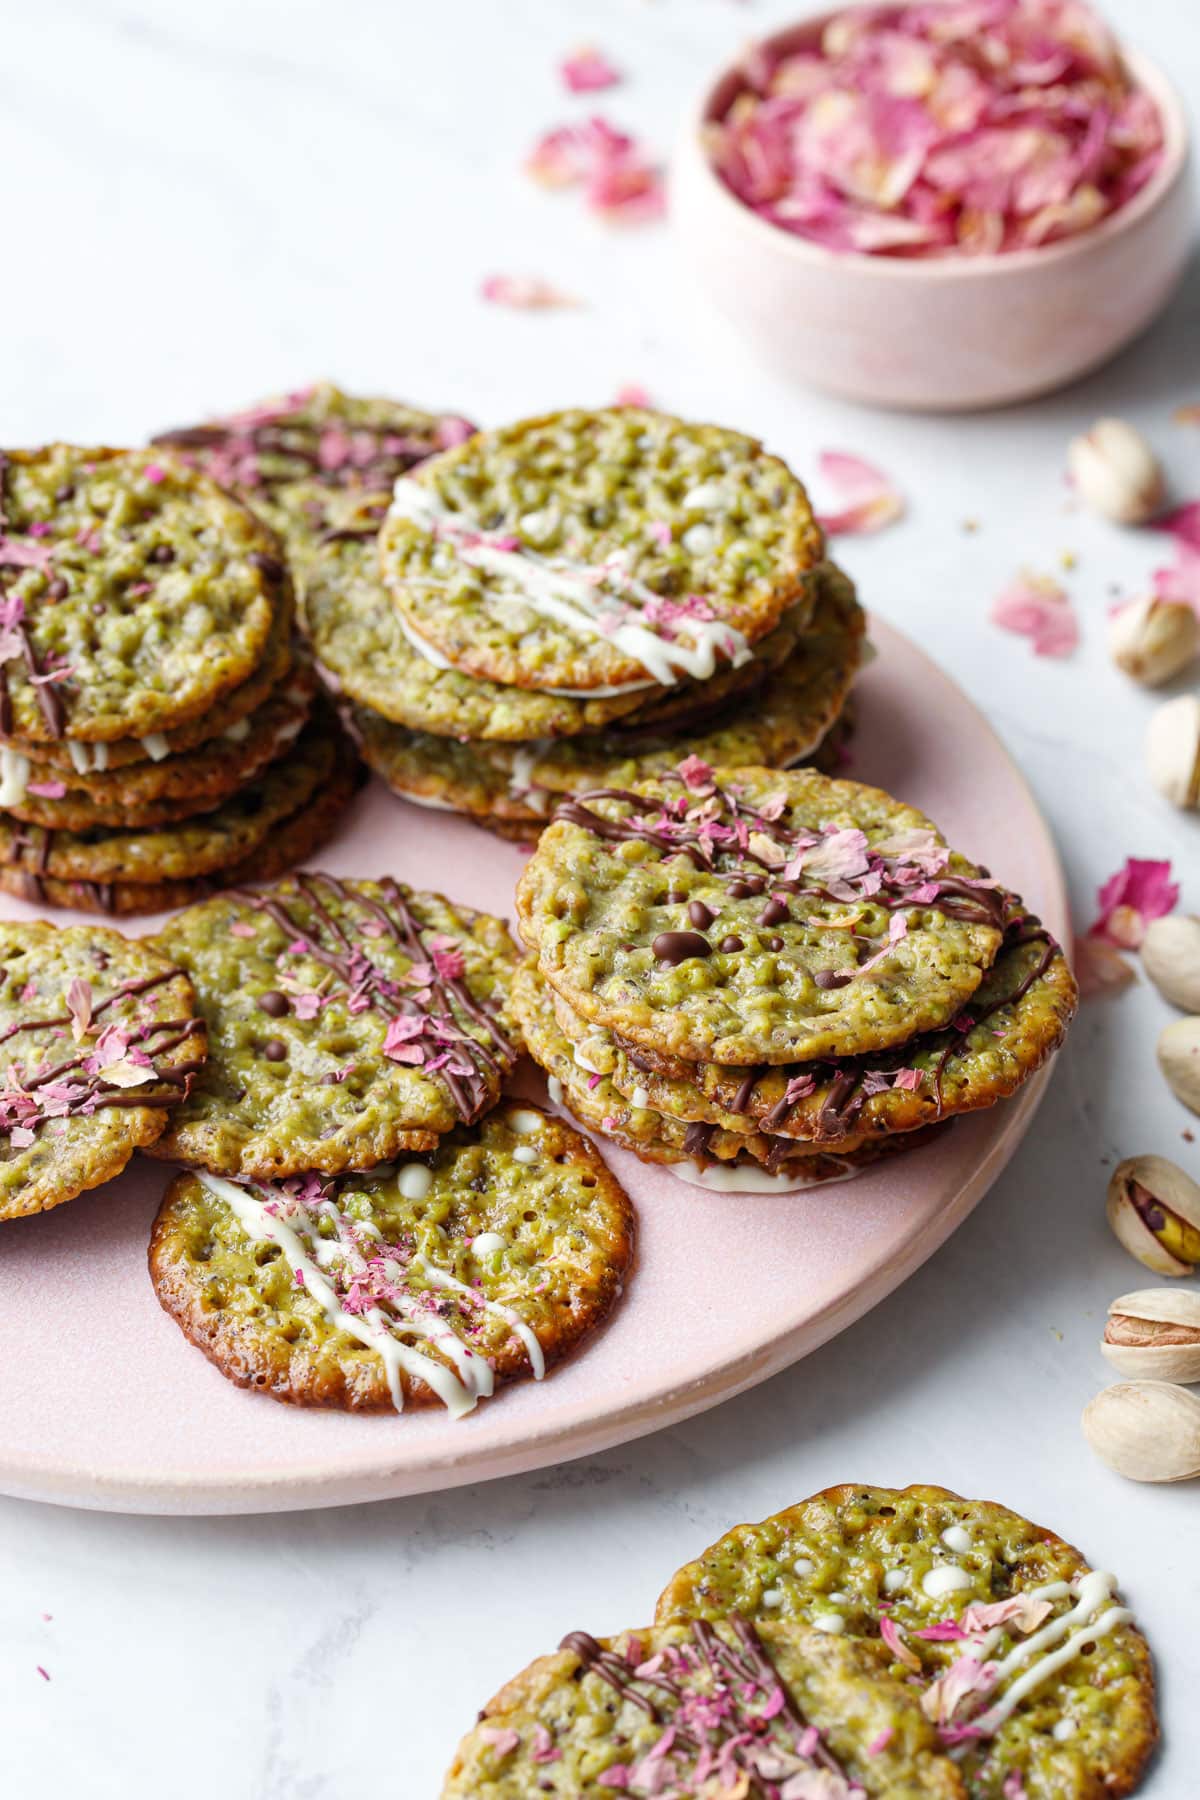 Messy stacks of Pistachio Florentine Cookies on a pink plate with bowl of rose petals and pistachios scattered around.